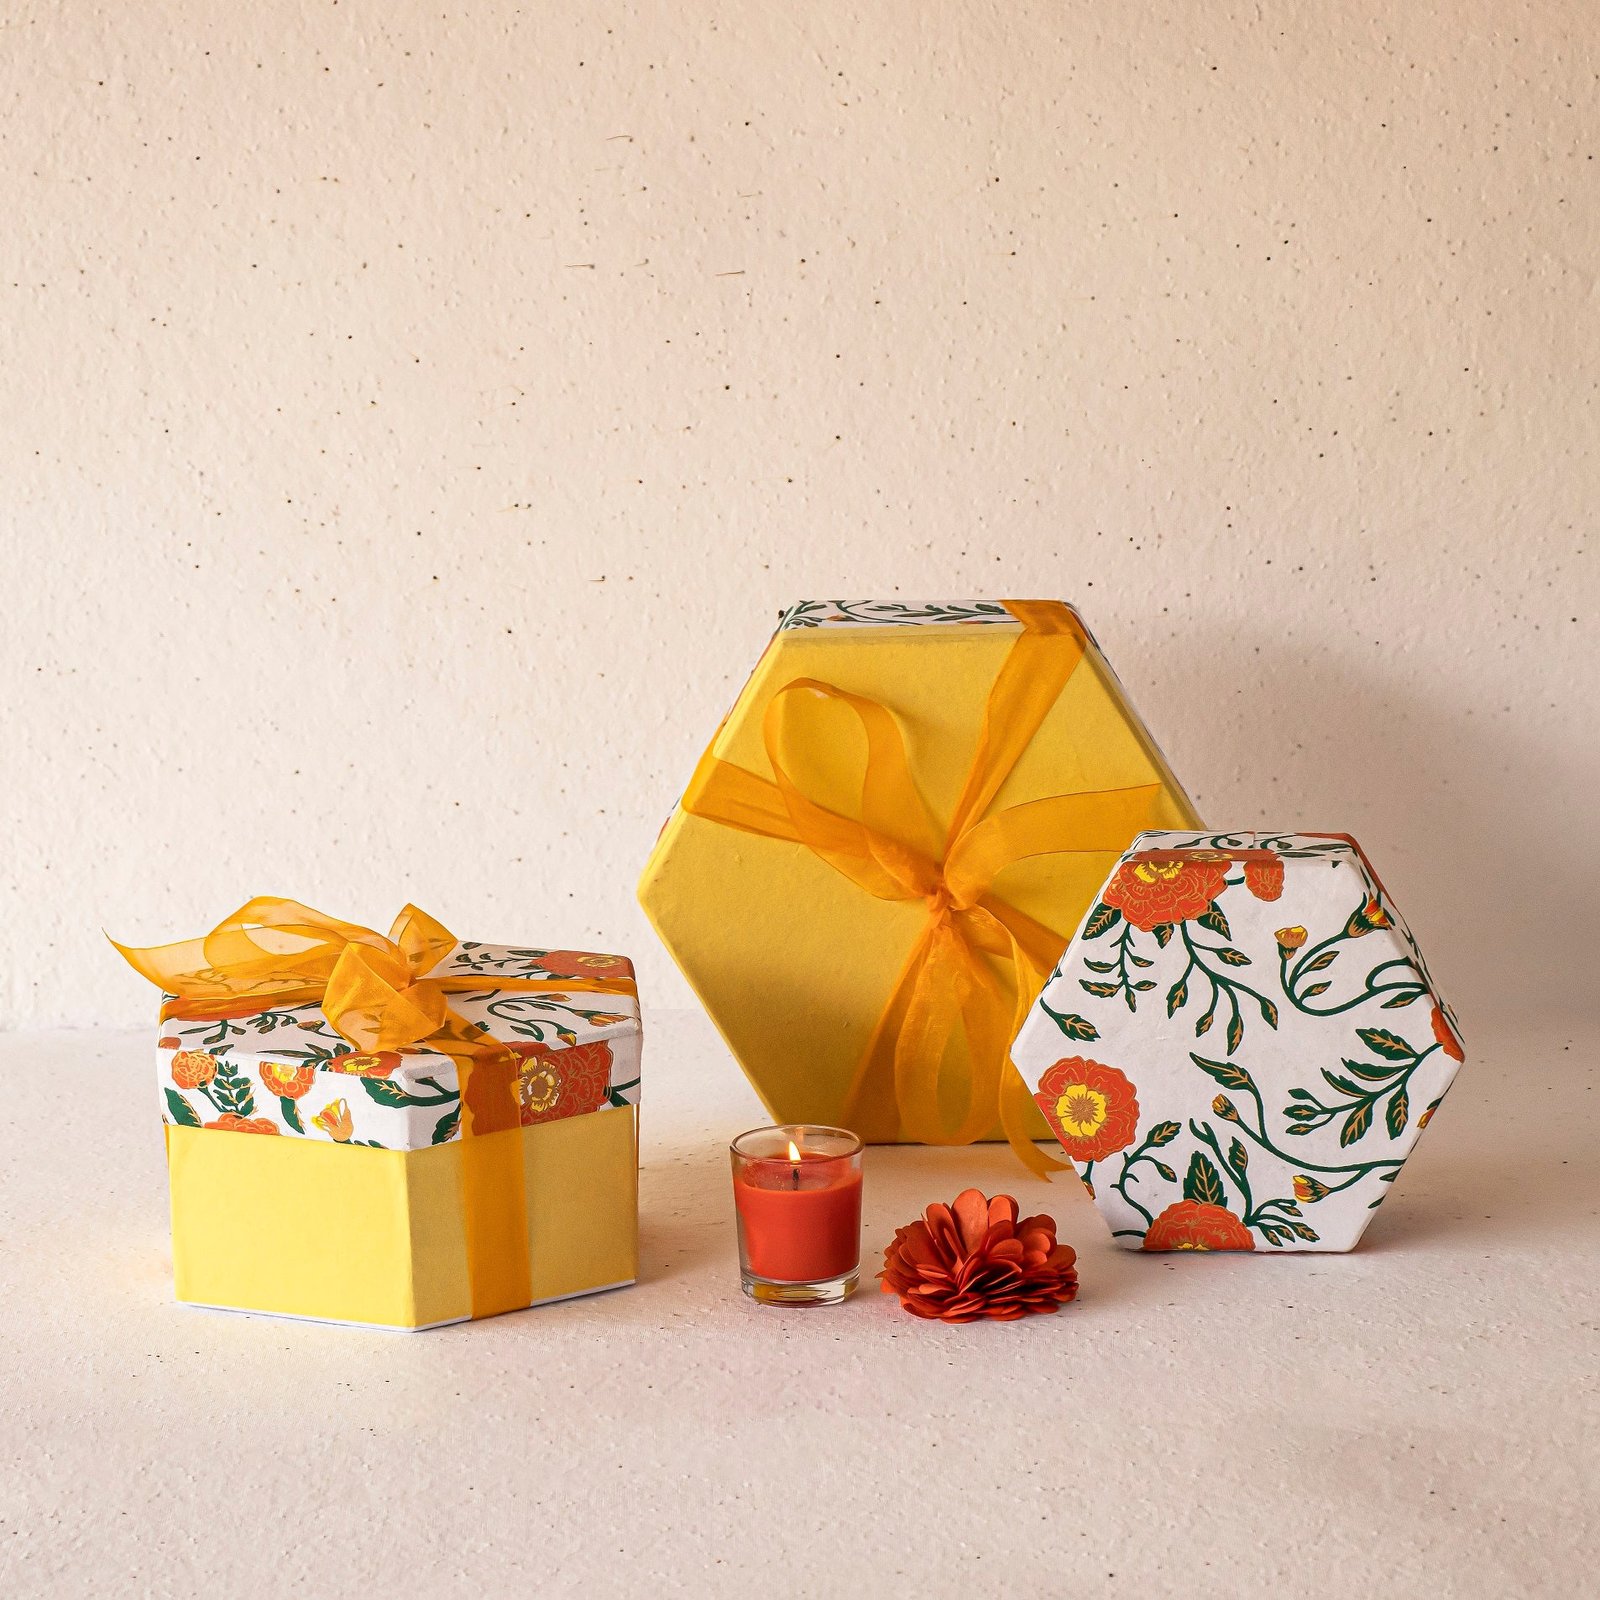 Phool.co - Looking for a perfect gift for your loved ones this festive  season? You need to look no further. Packed inside this rich eco-friendly  box made from recycled Kraft paper are